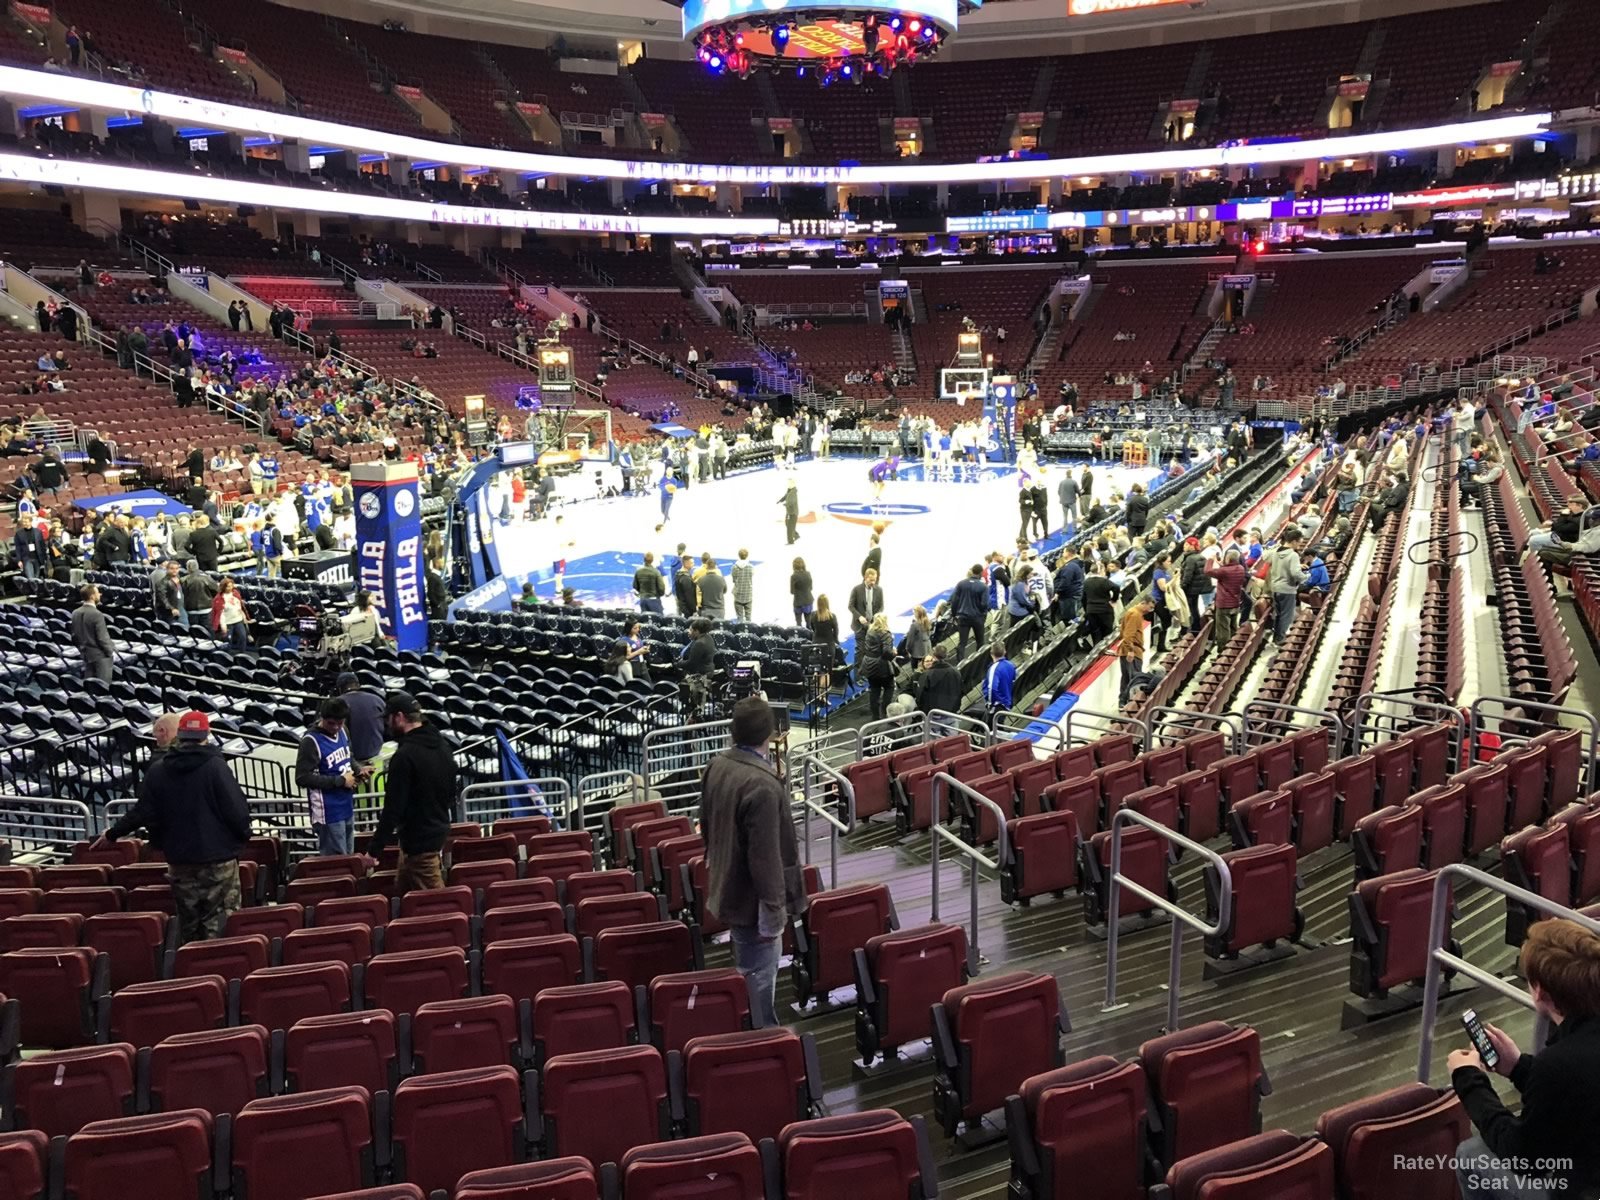 section 109, row 14 seat view  for basketball - wells fargo center